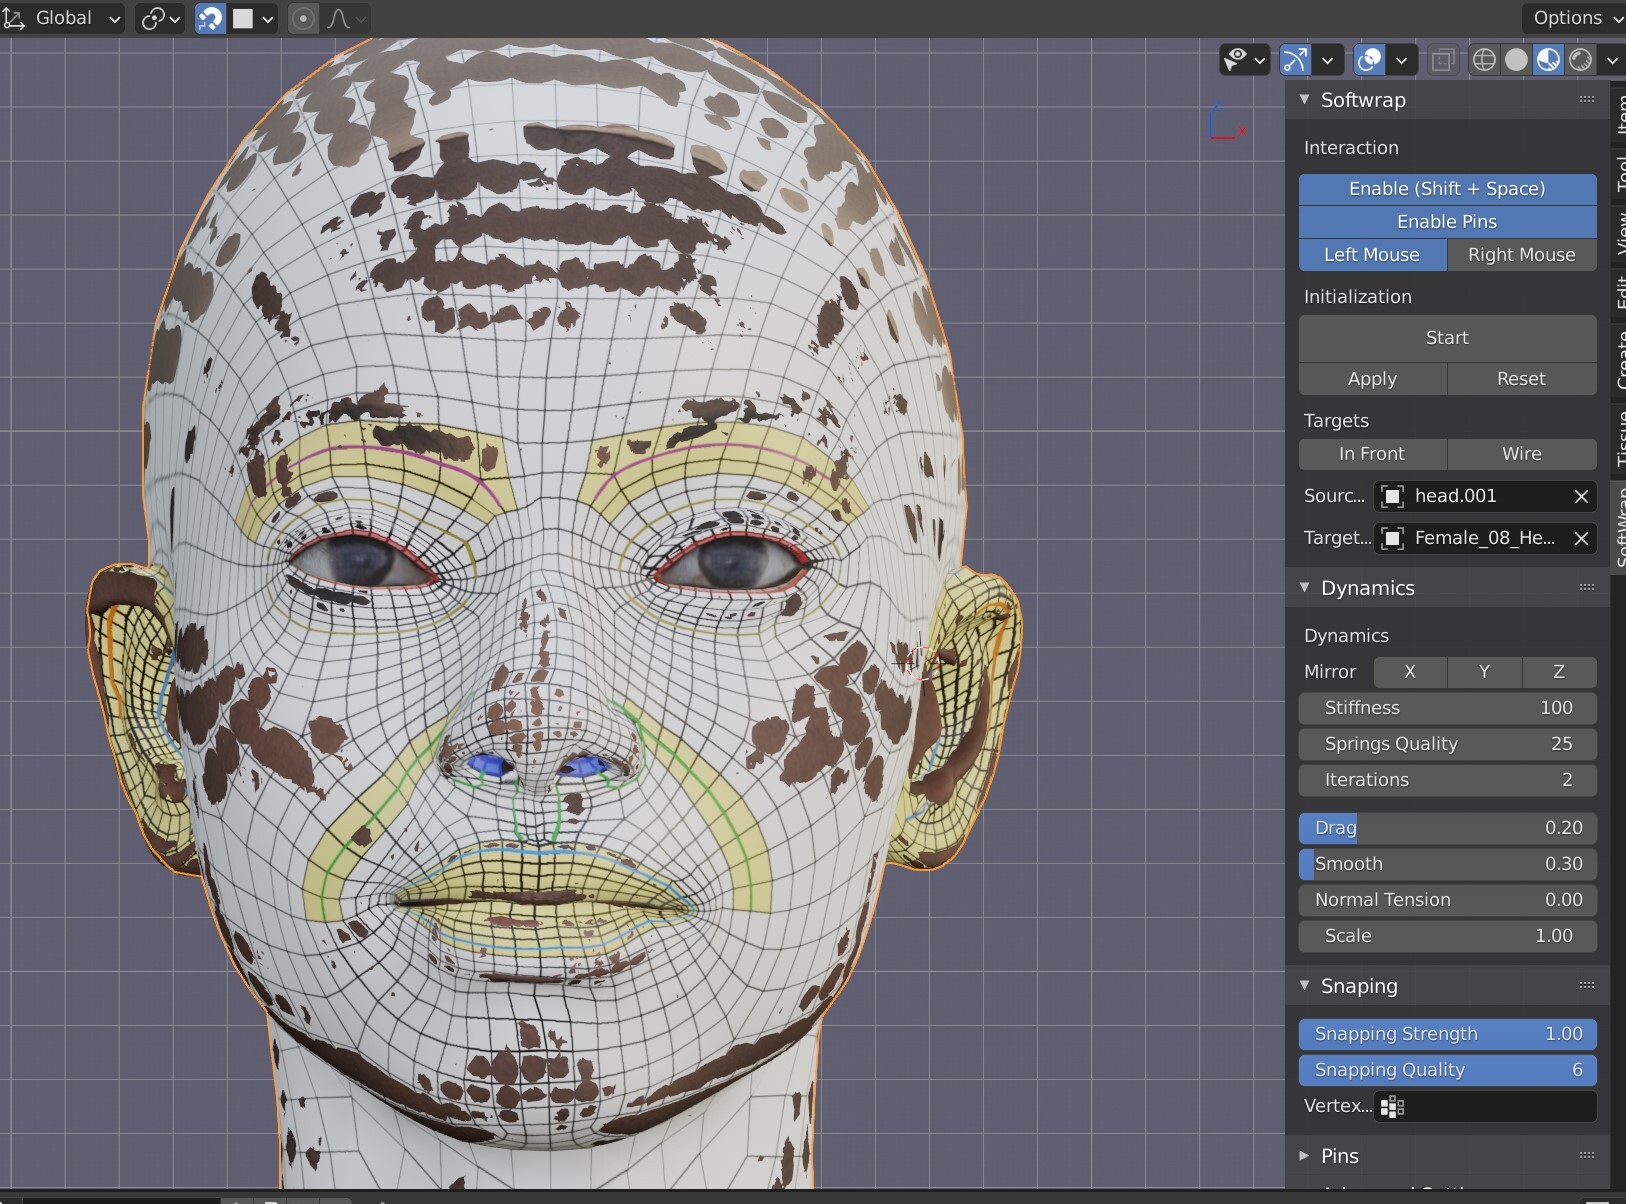 Is there anyway to use custom meshes with HumanoidDescription